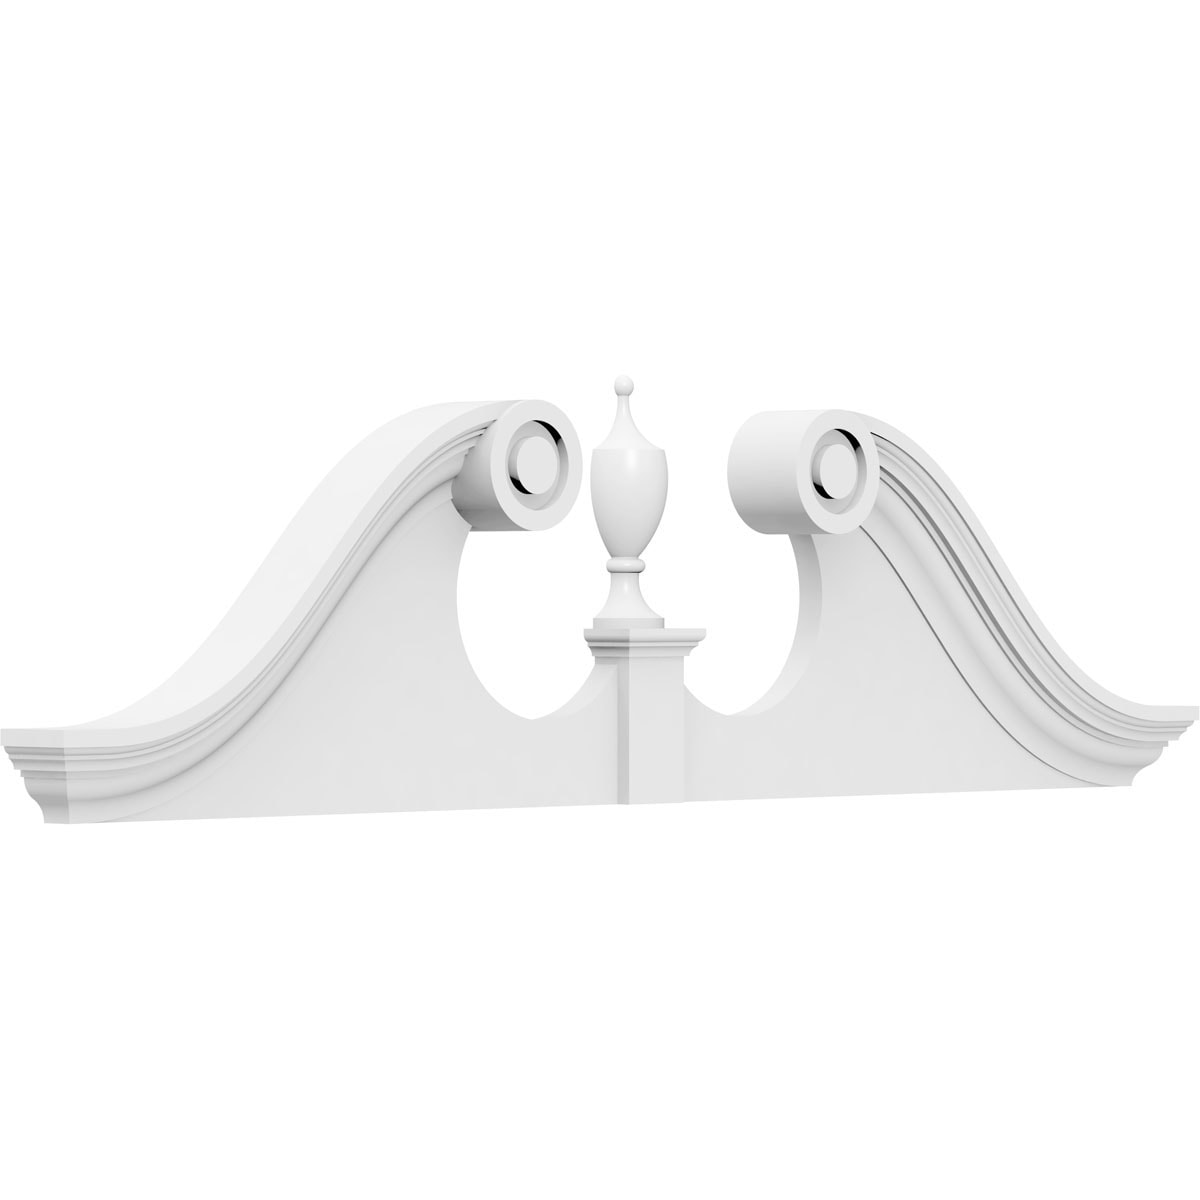 Ekena Millwork Rams Head 50-in x 12.5-ft PVC Pediment Entry Door Casing Accent in White | PEDPS050X125RHP00